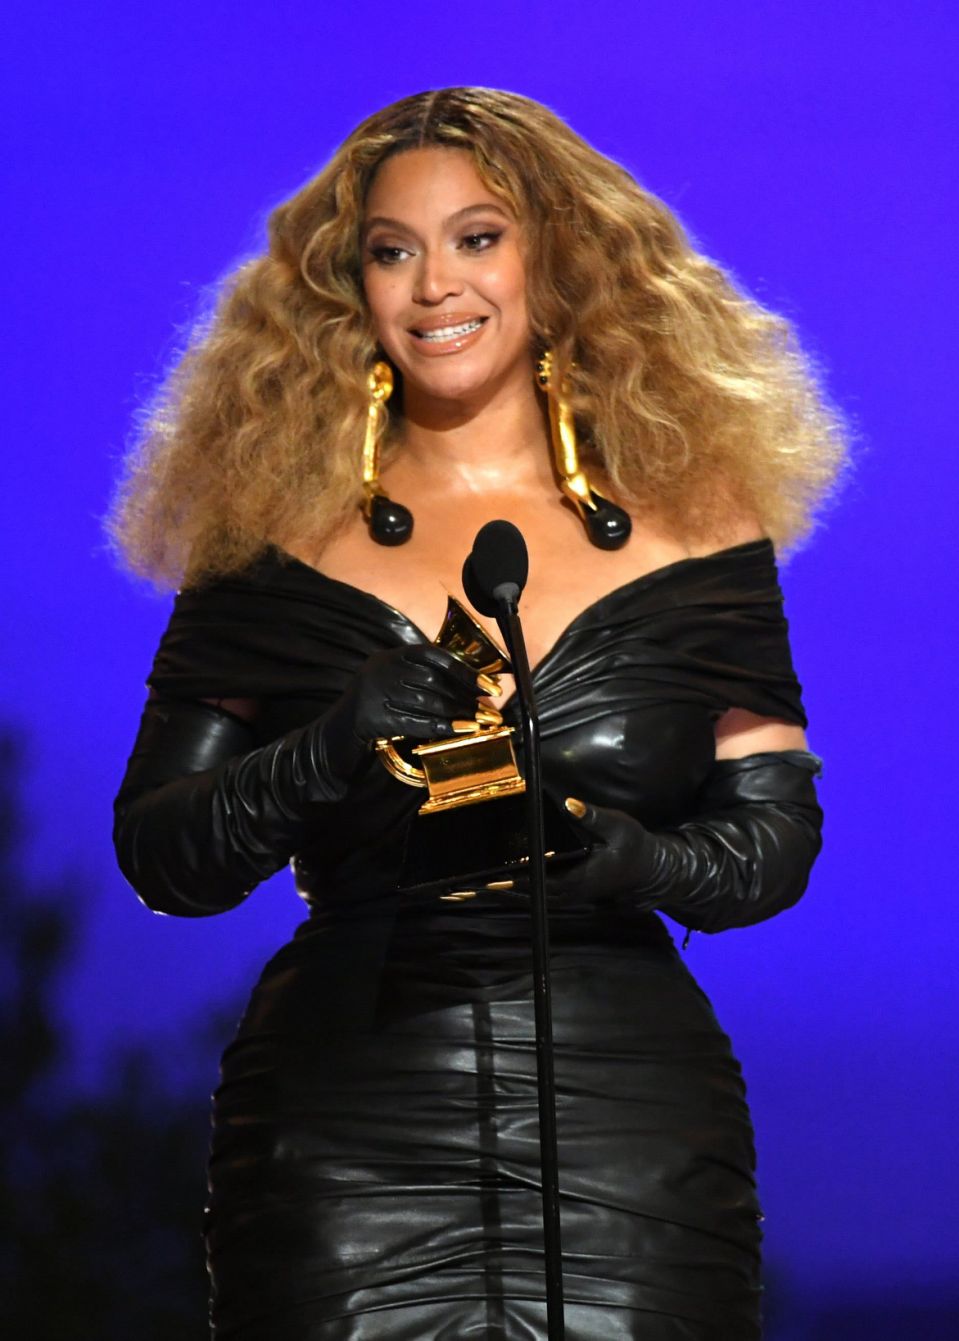 Grammy Awards 2021 Beyonce Wins Grammy For A Record 28th Time! The